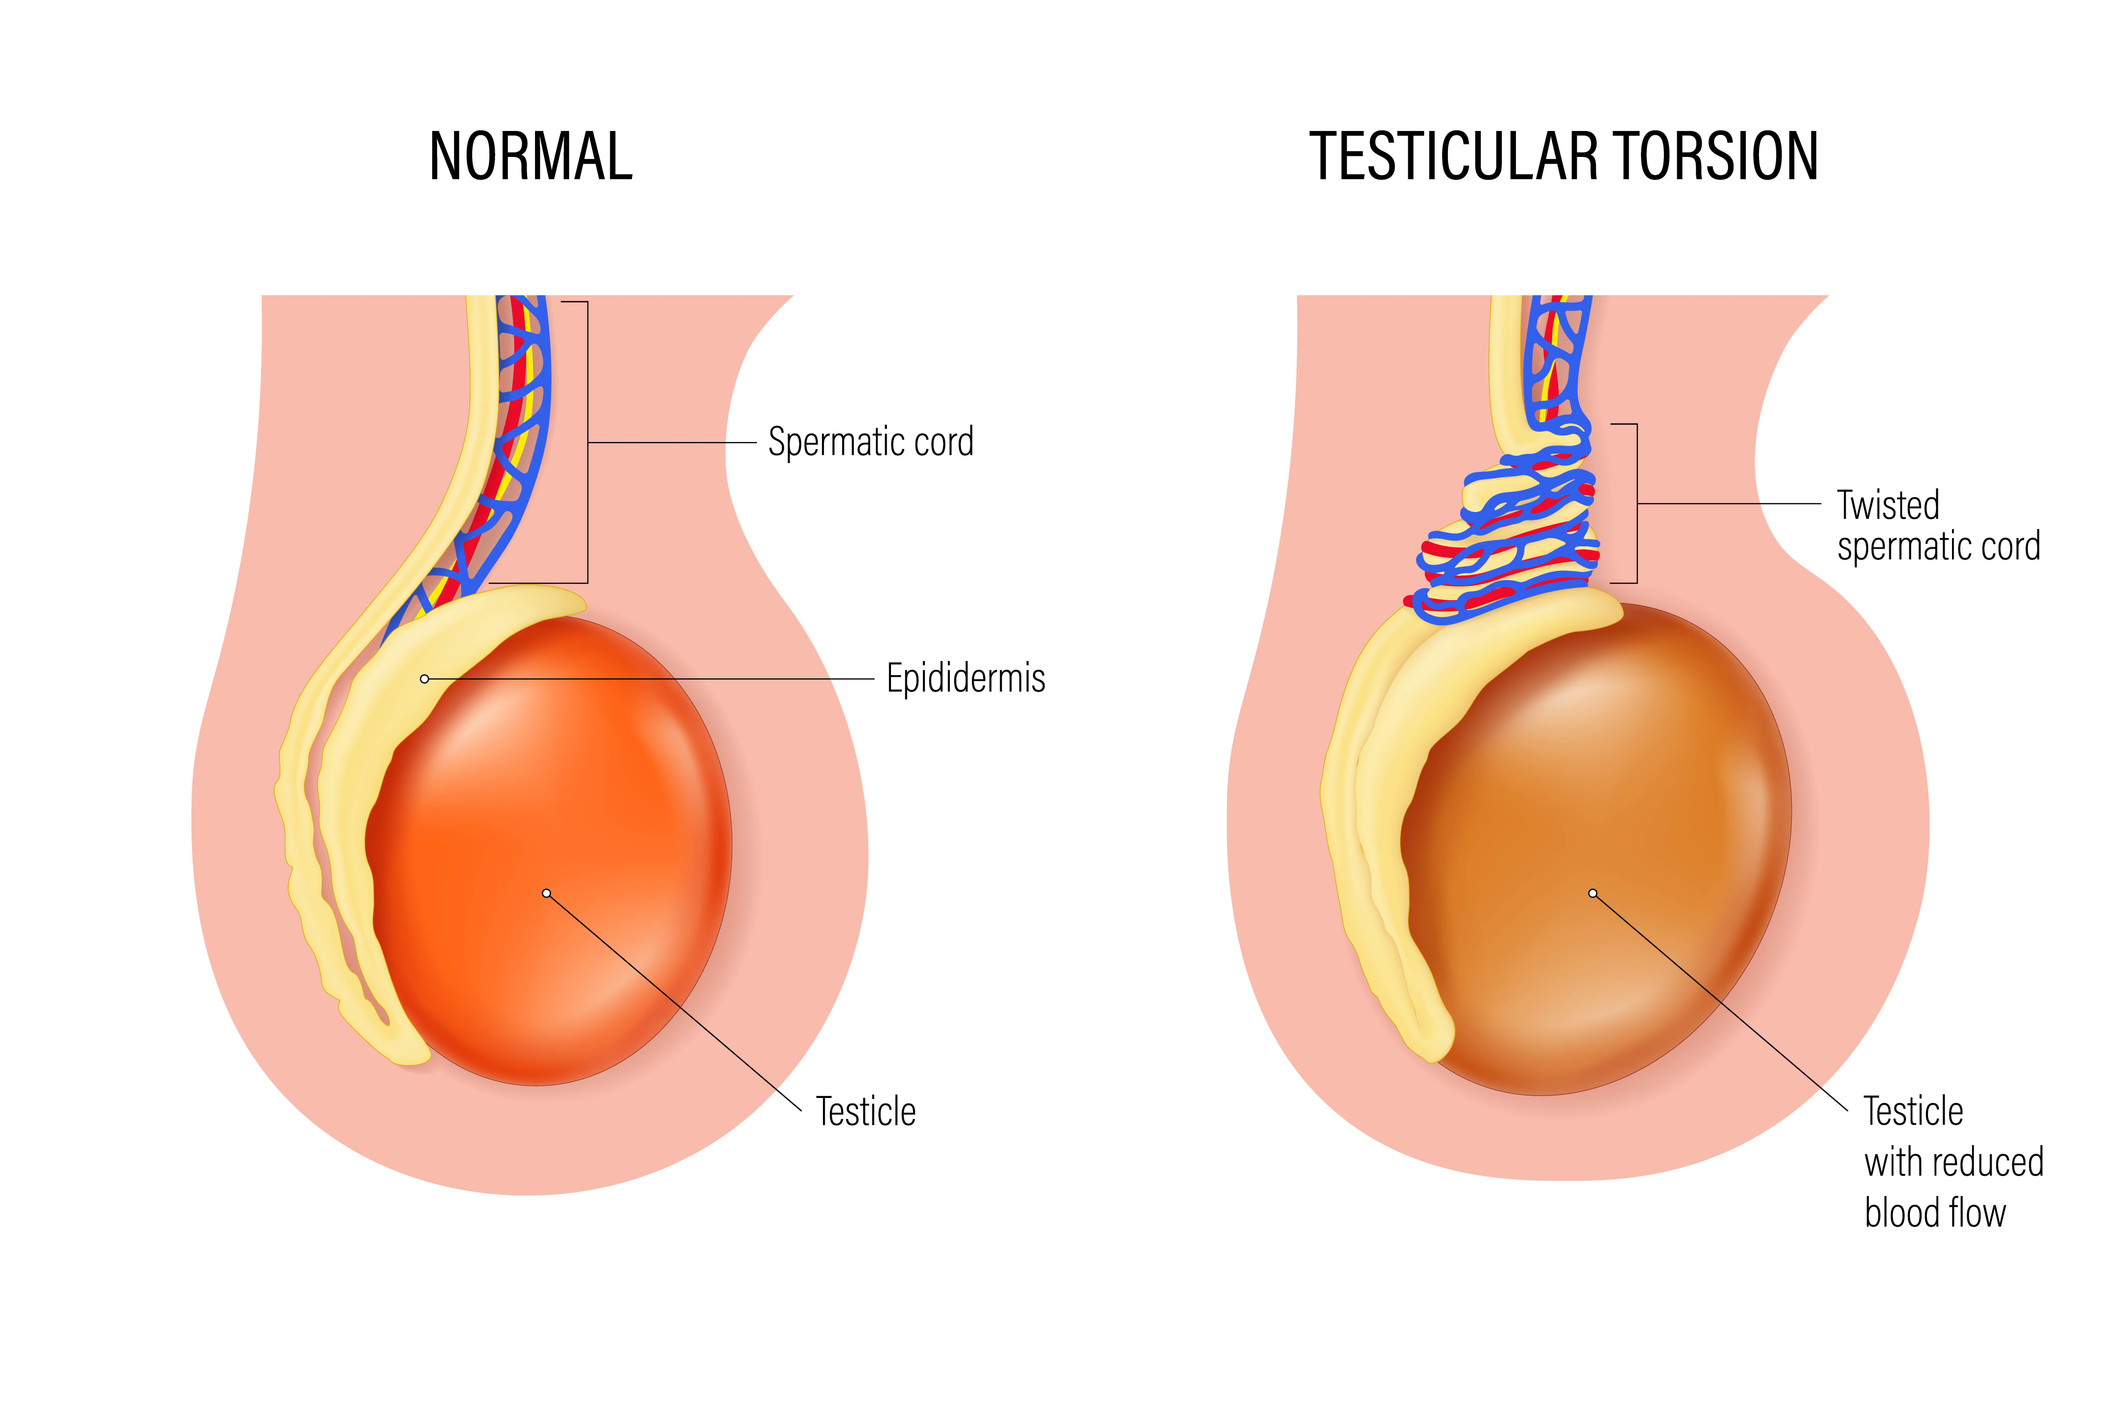 Illustration comparing normal testicular anatomy with testicular torsion, highlighting twisted spermatic cord